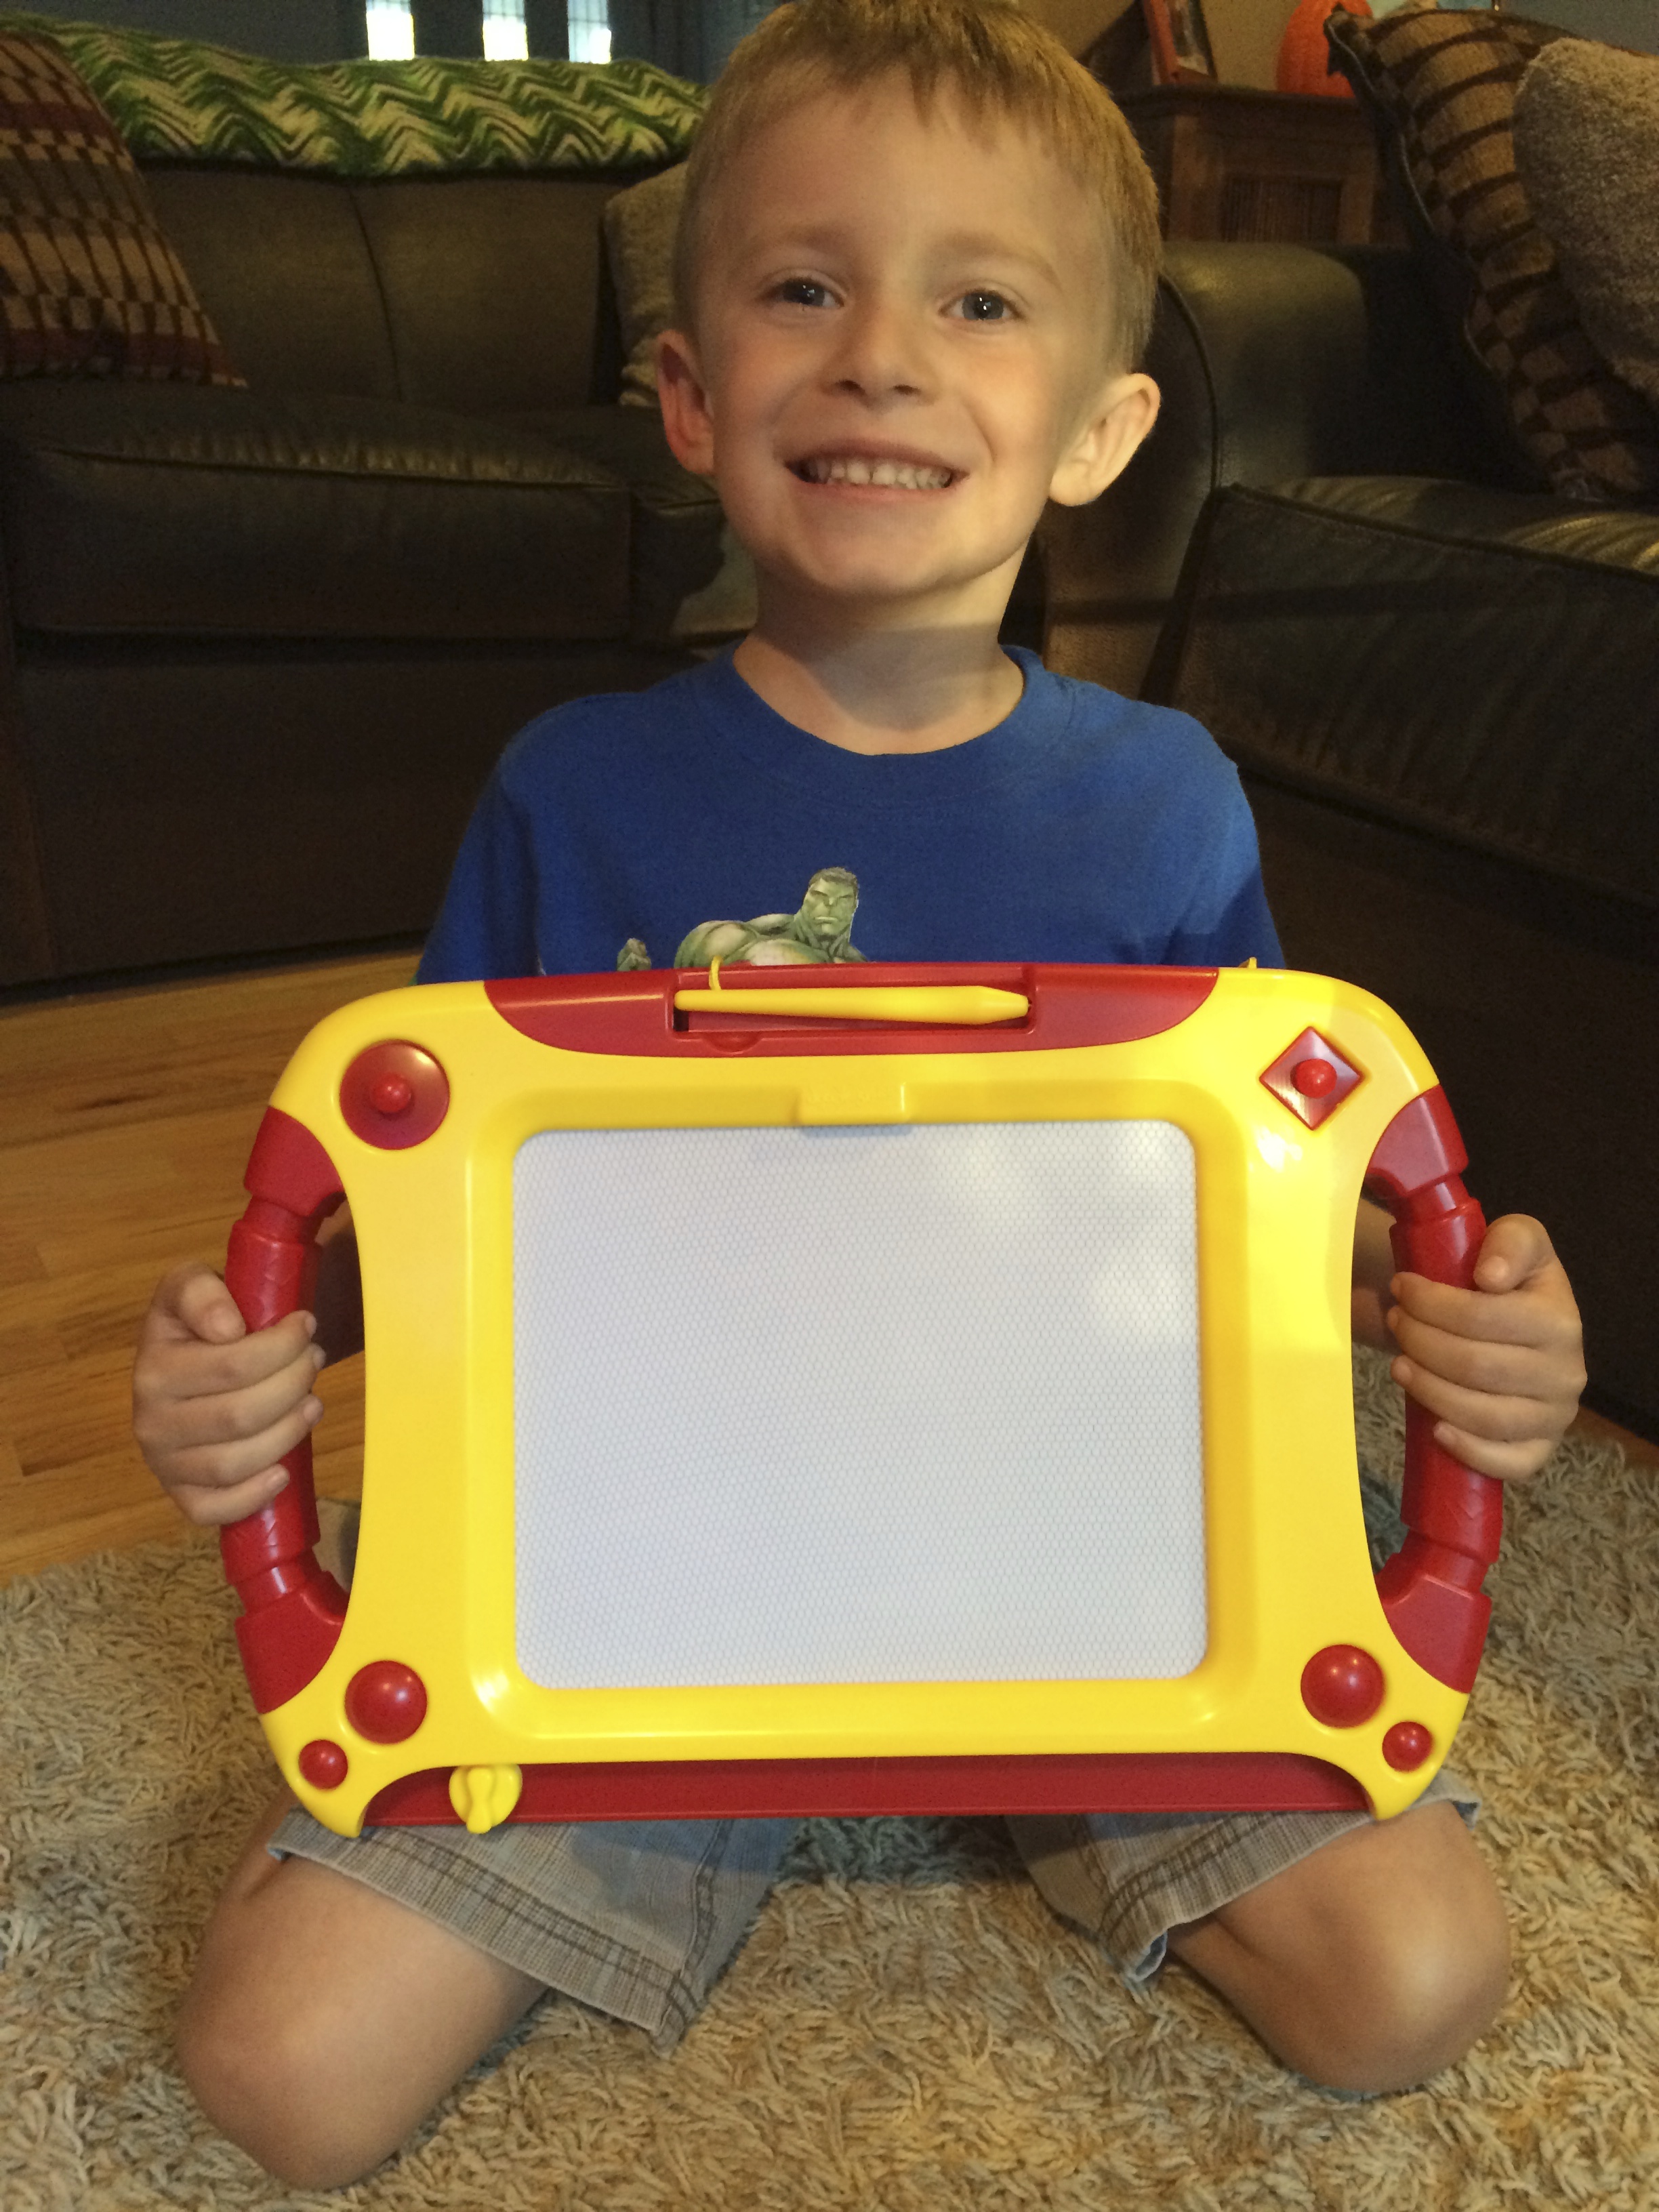 The Doodle Sketch pad is easy to hold and use allowing for hours of fun and learning!